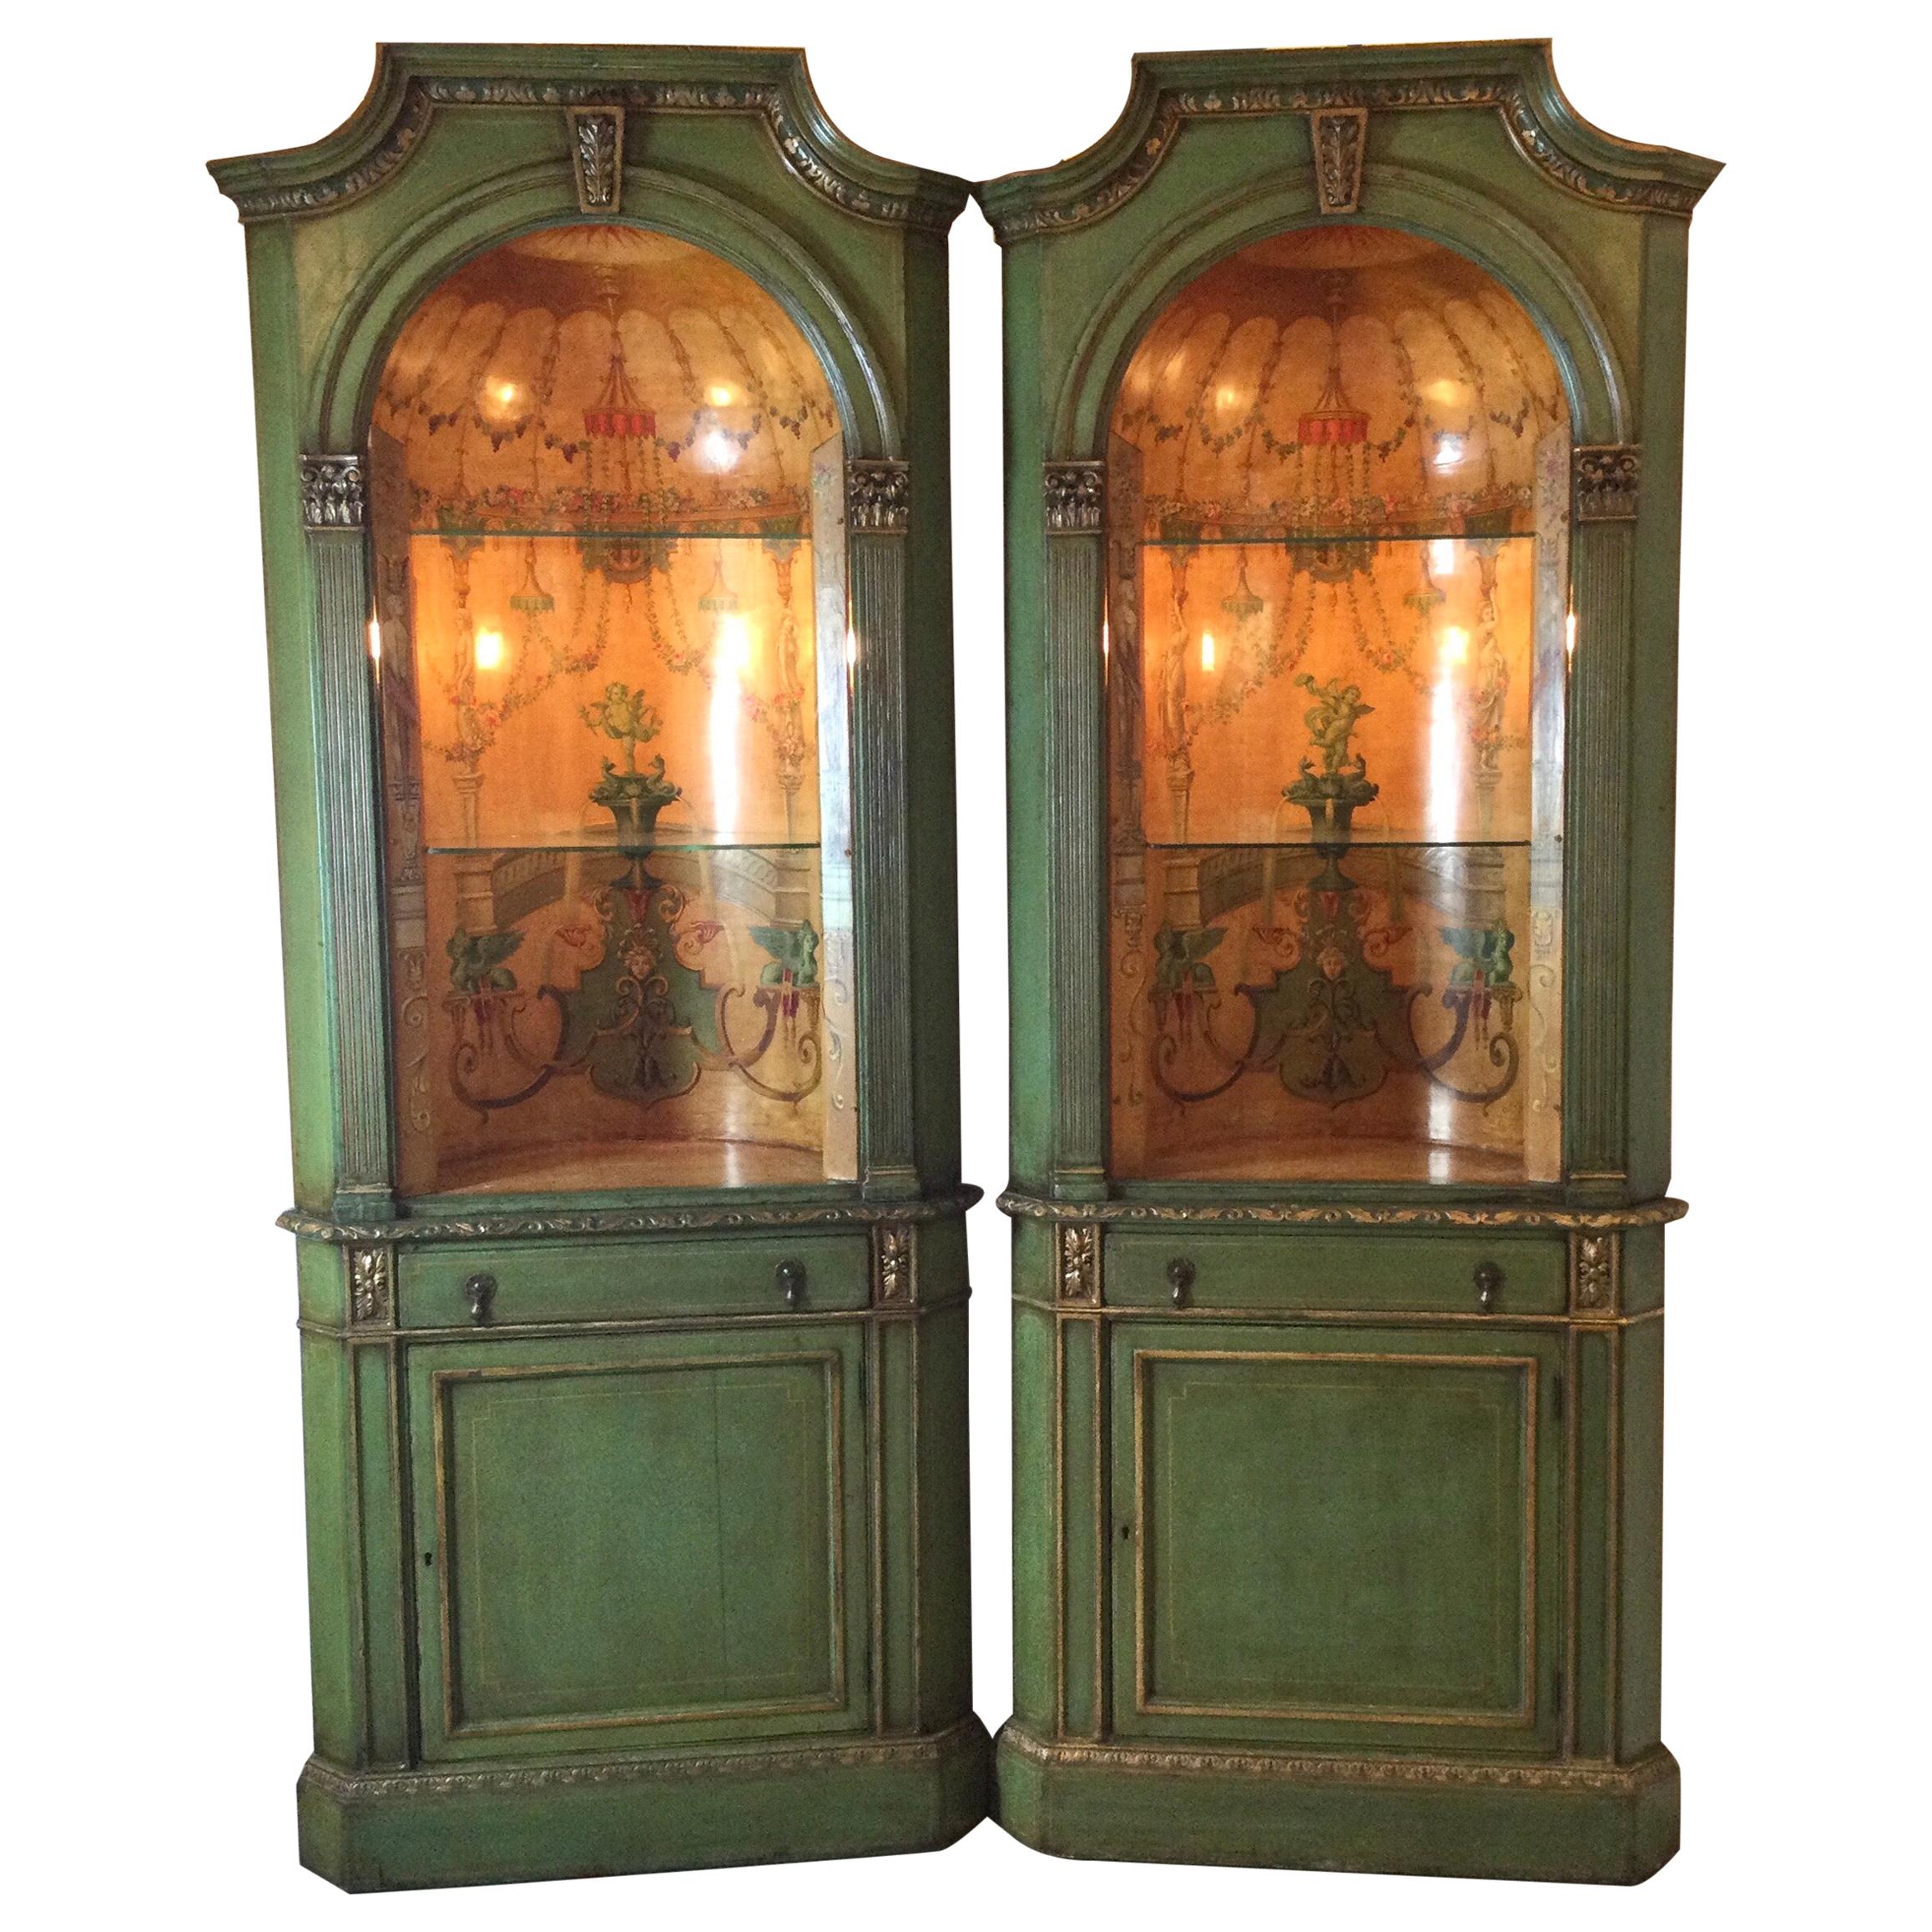 Wonderful Pair of Neo Classical Corner Cabinets w/ Hand Painted Curved Interiors